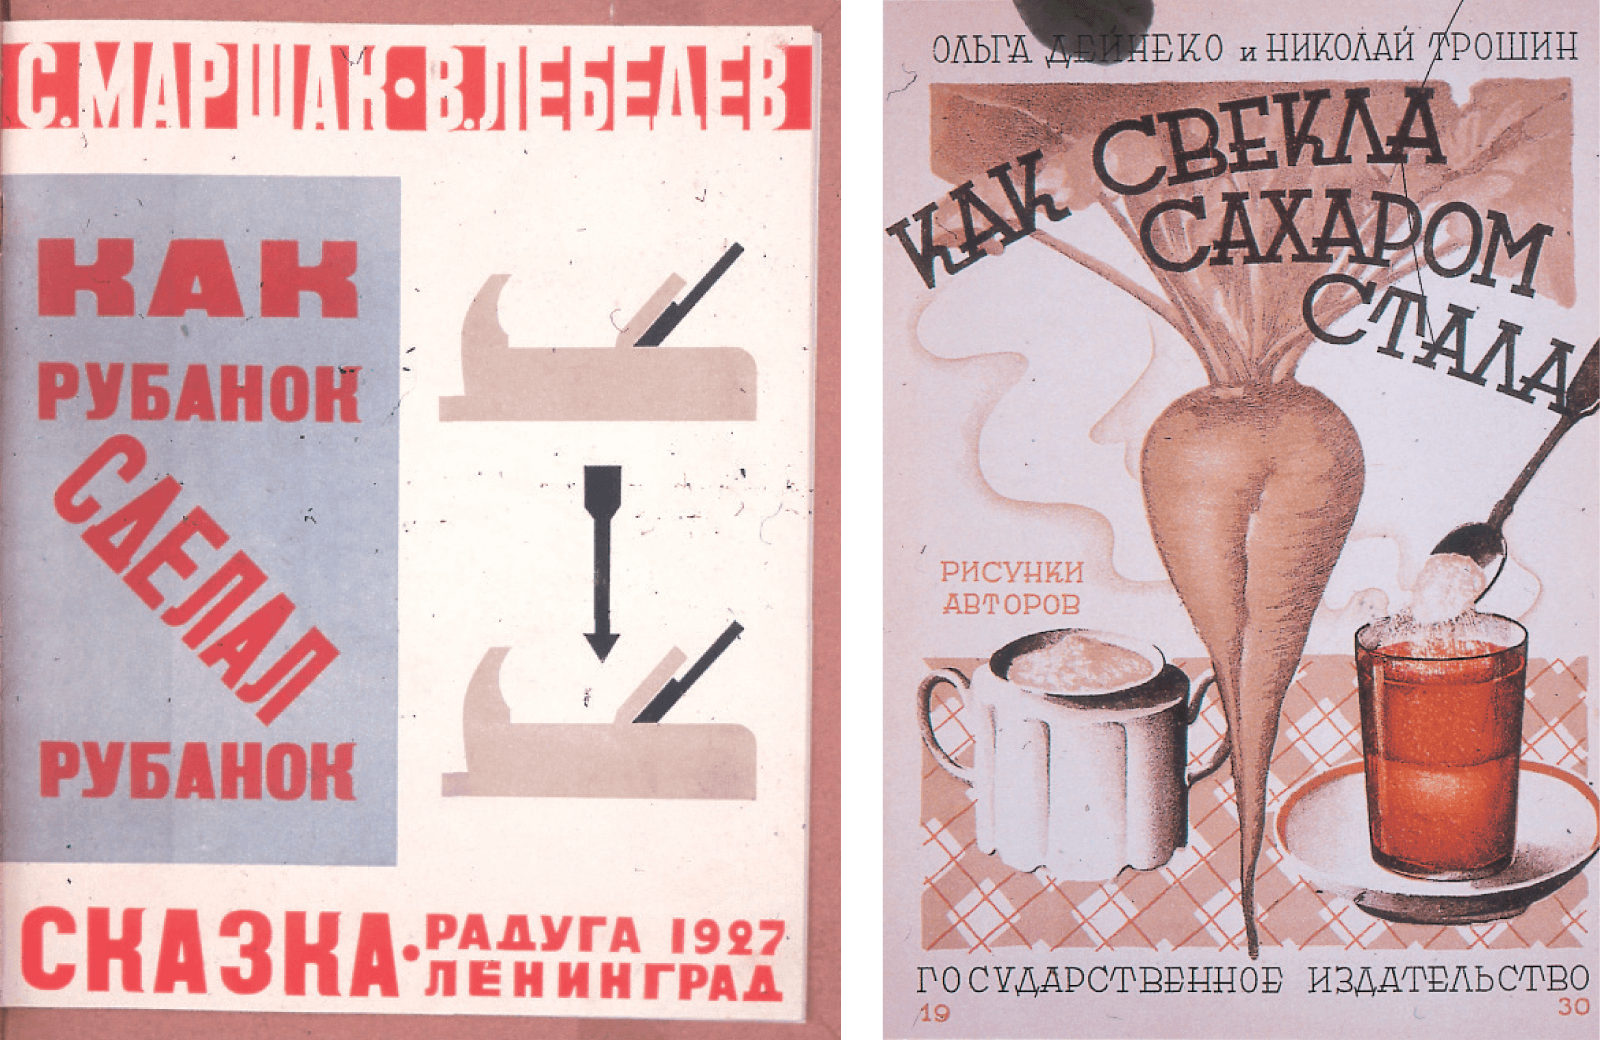 Two images from Soviet children’s books. One depicts the cover of the 1927 book “How the Plane Made the Plane” and the other the cover of the 1930 book “How Beets Become Sugar.” The titles have been translated from the original Russian.